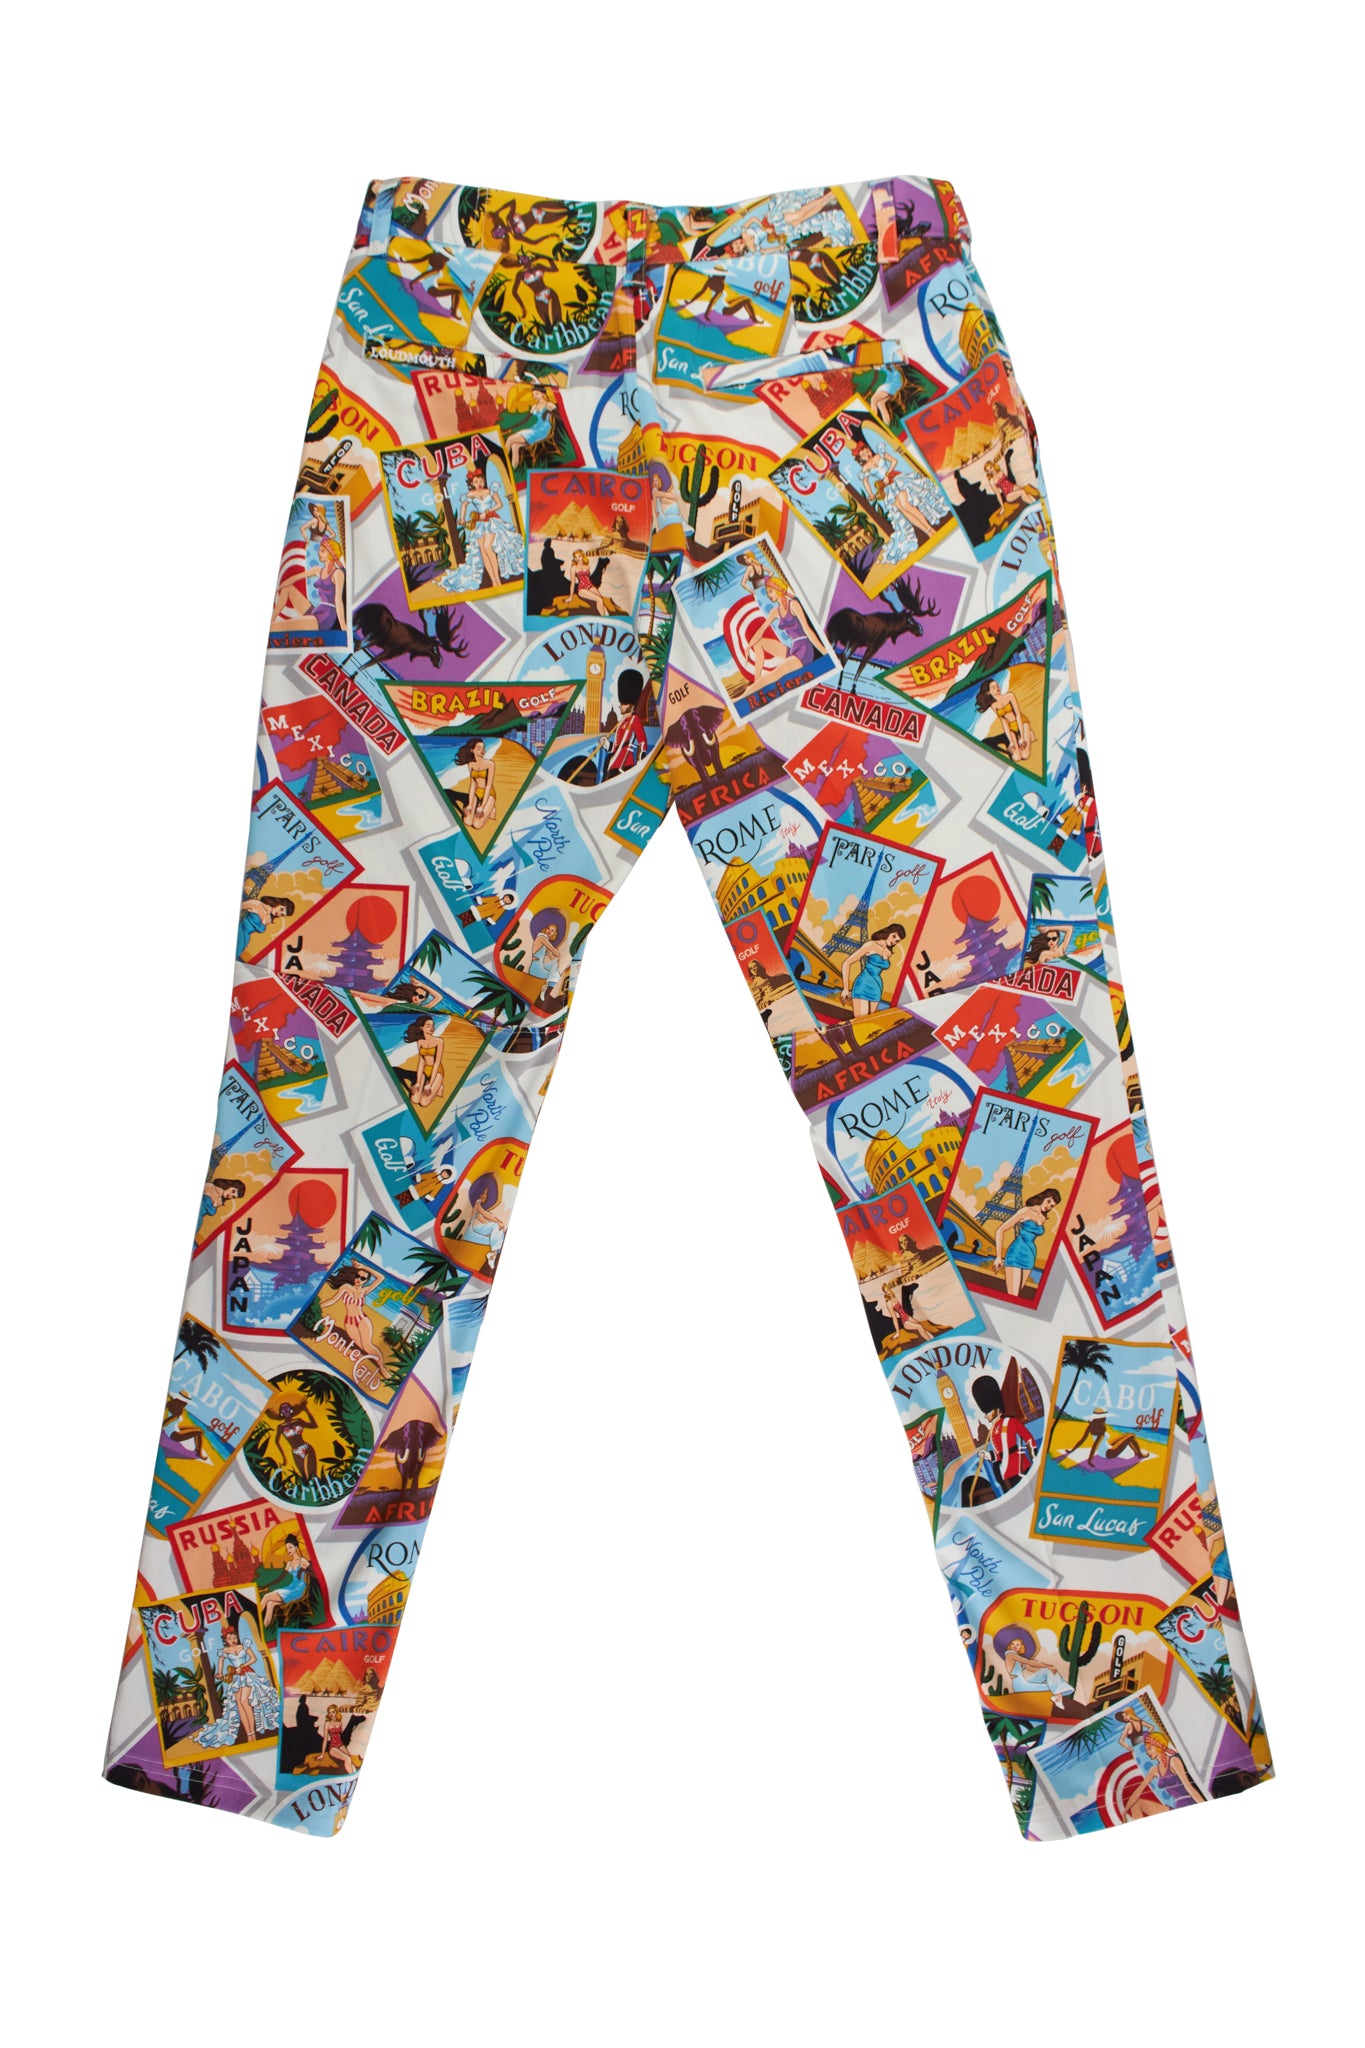 Fairway Birdie Pant - Postcards from the Wedge – Loudmouth